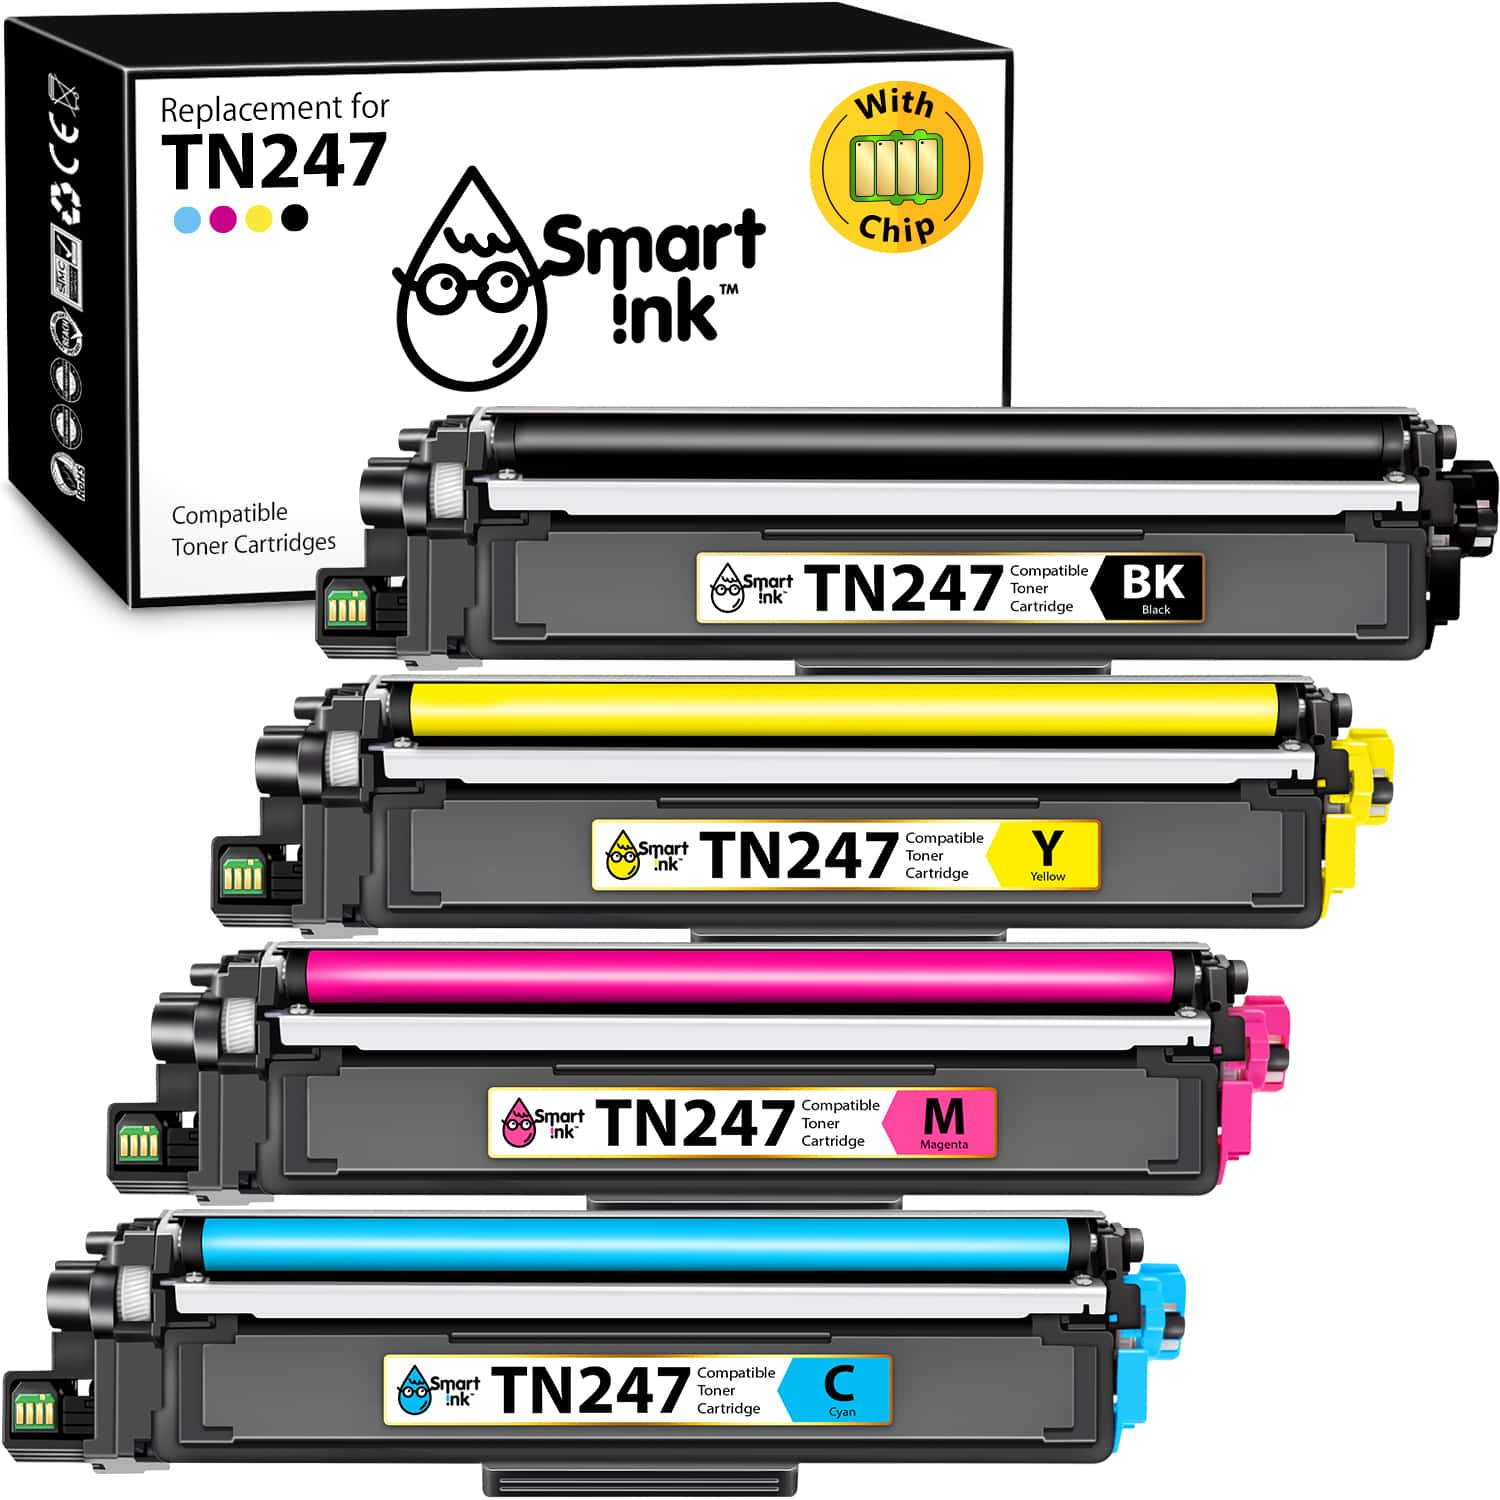 Brother TN 247 Replacement Toner Cartridges - Buy Brother TN 247 Toner  Cartridge in EU at the best price